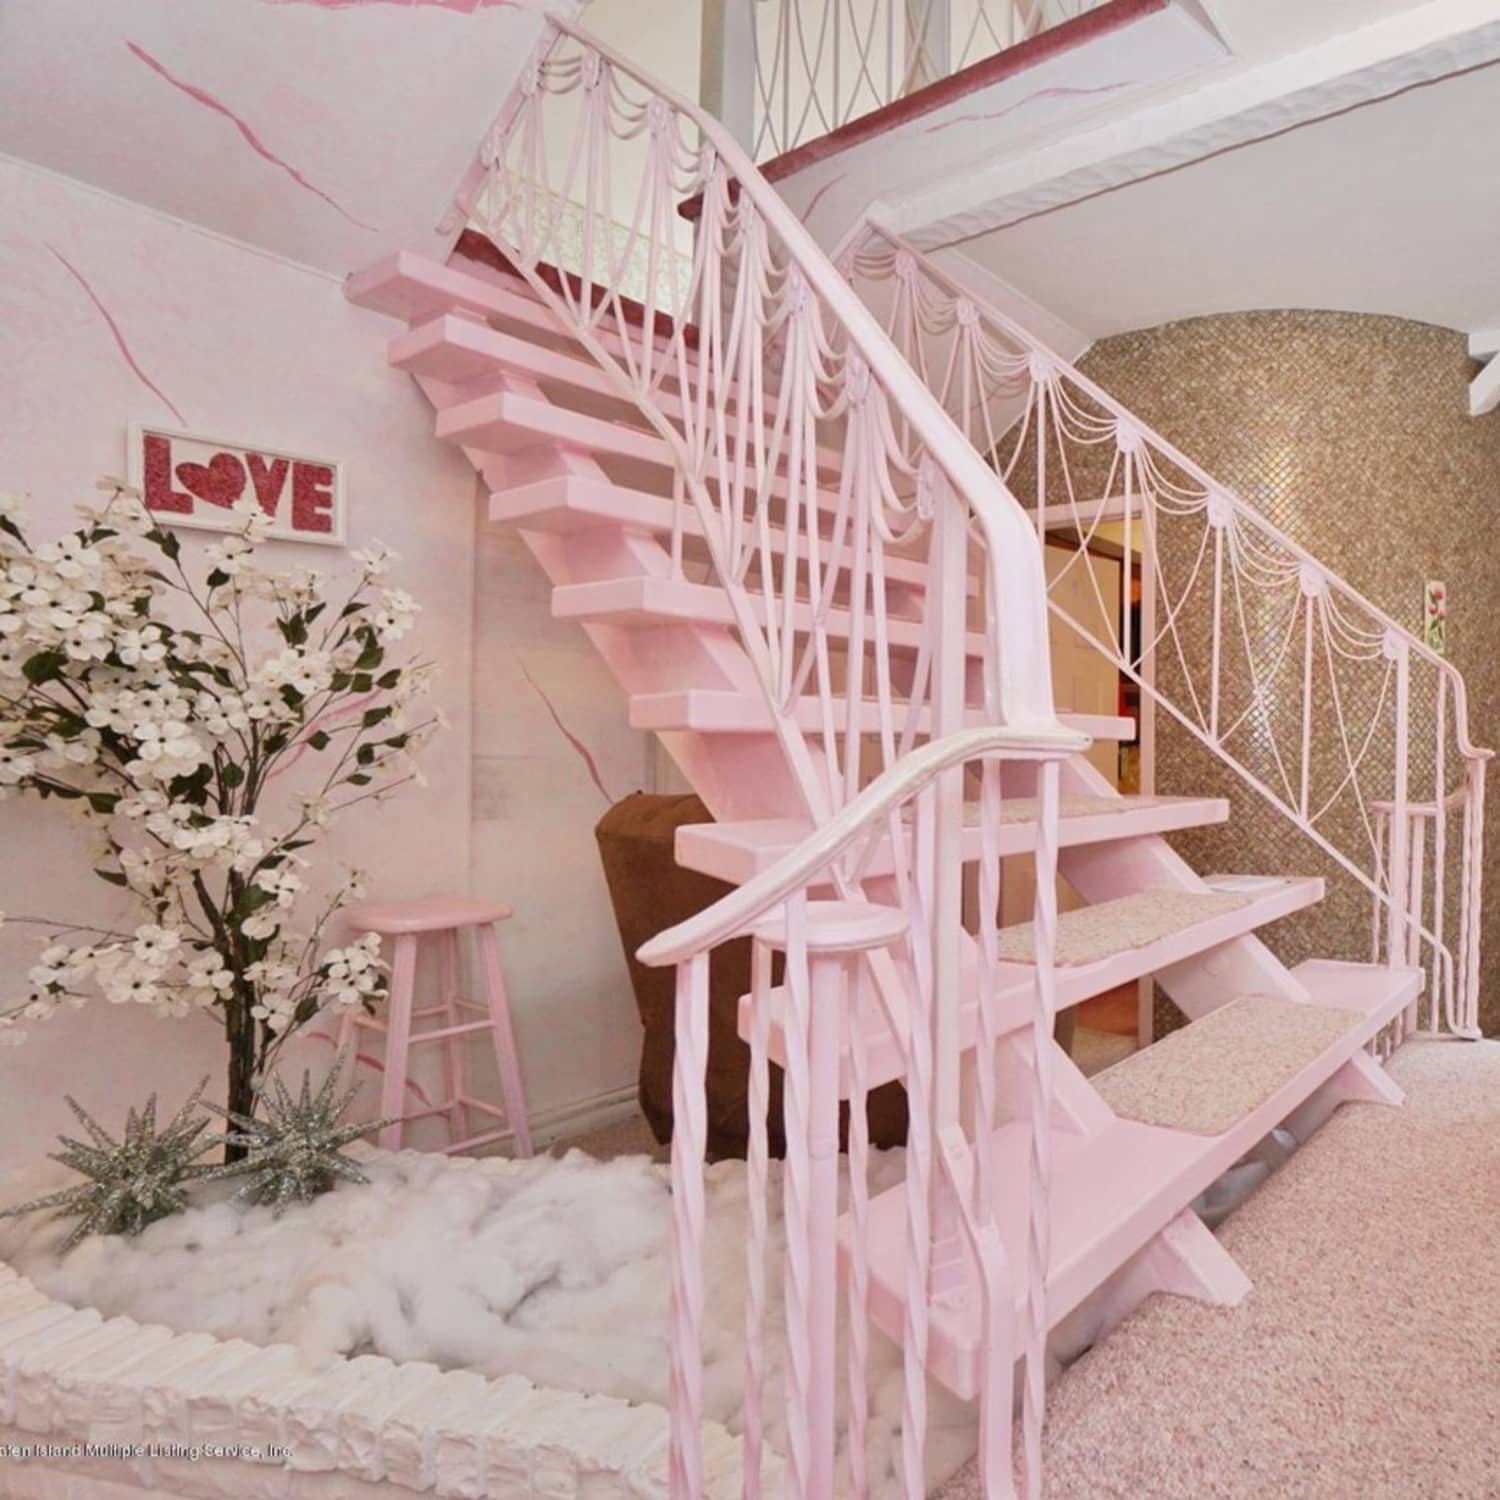 1970 Staten Island Home for Sale and Almost Every Room Is Pink